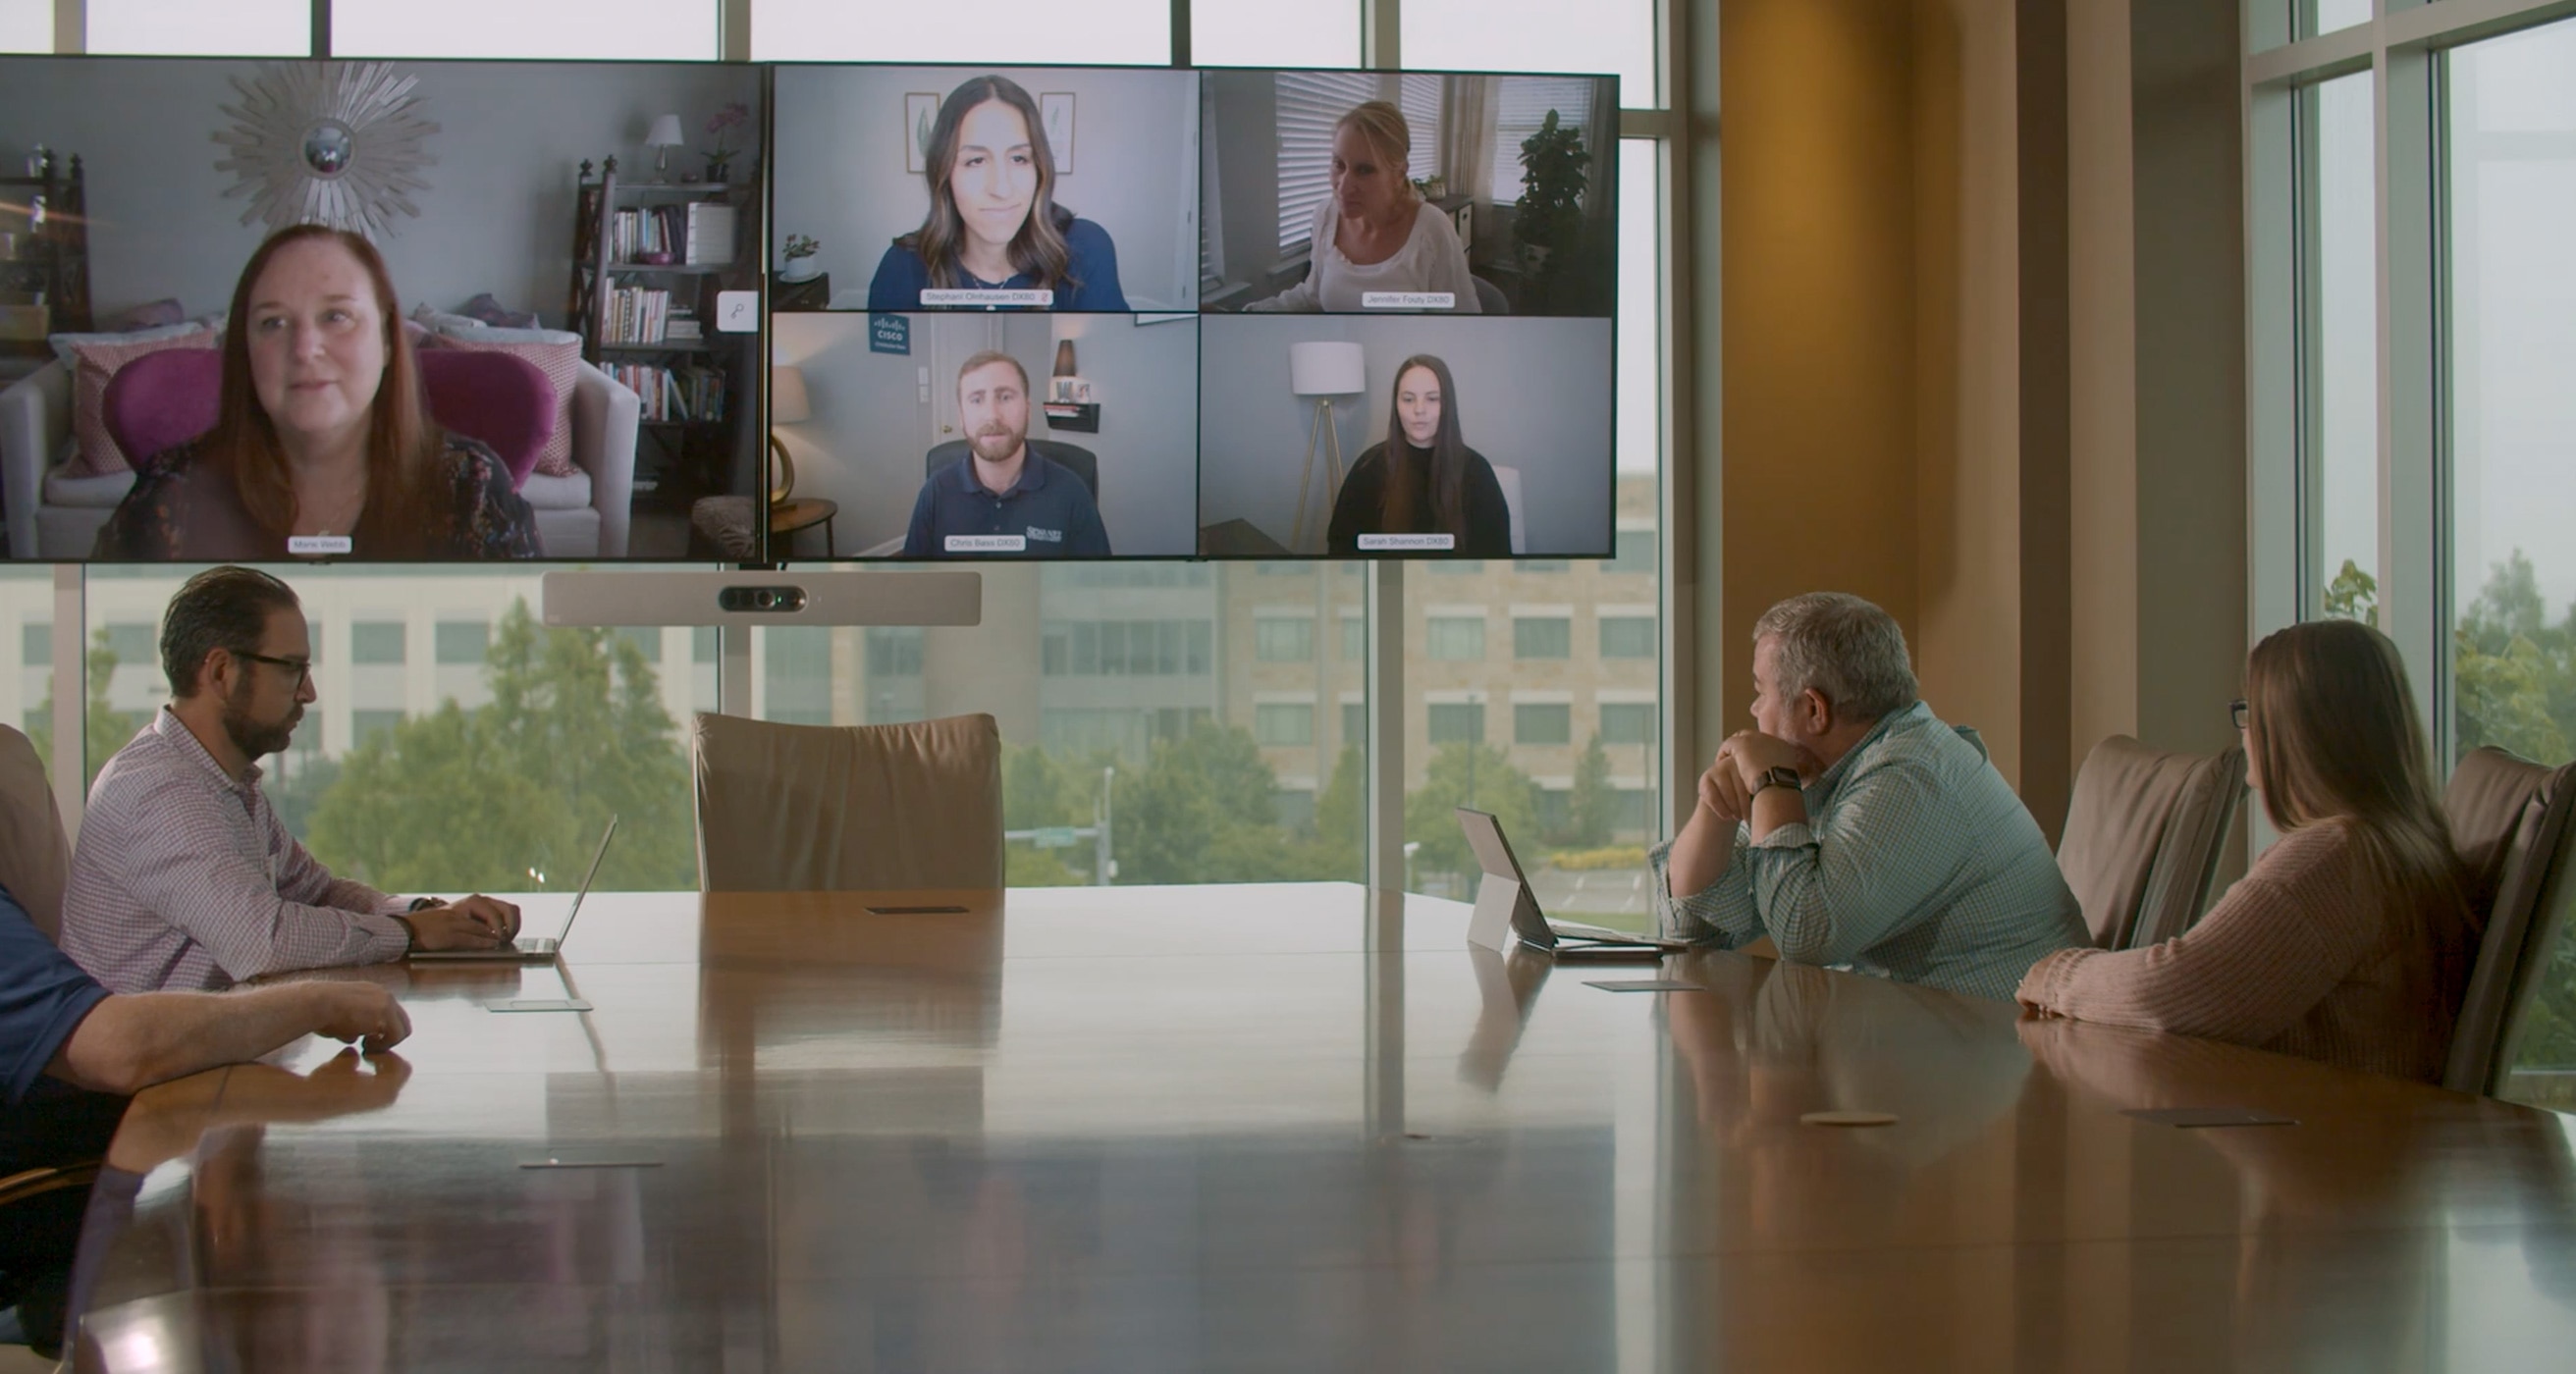 The team collaborates via a video meeting, with some people joining from a conference room and others from other locations.